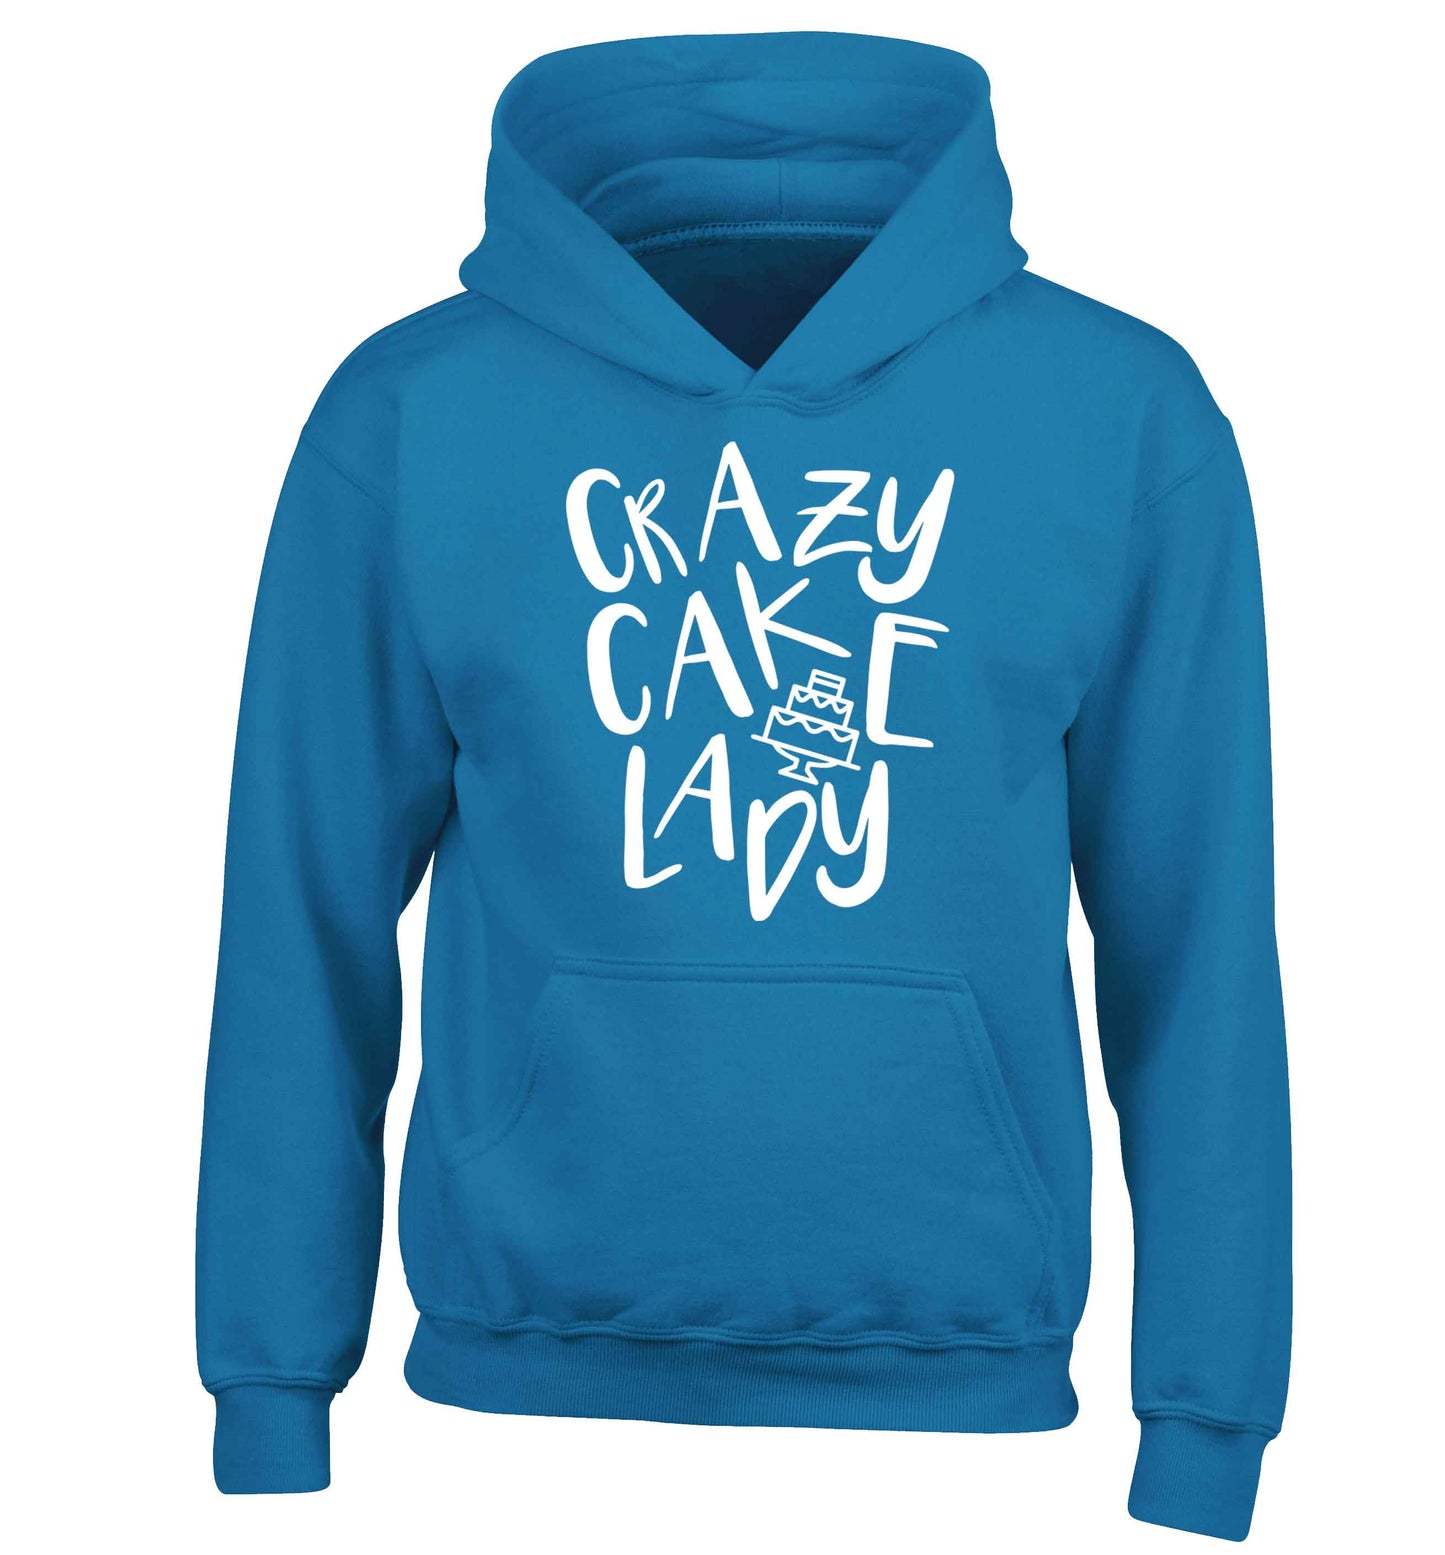 Crazy cake lady children's blue hoodie 12-13 Years